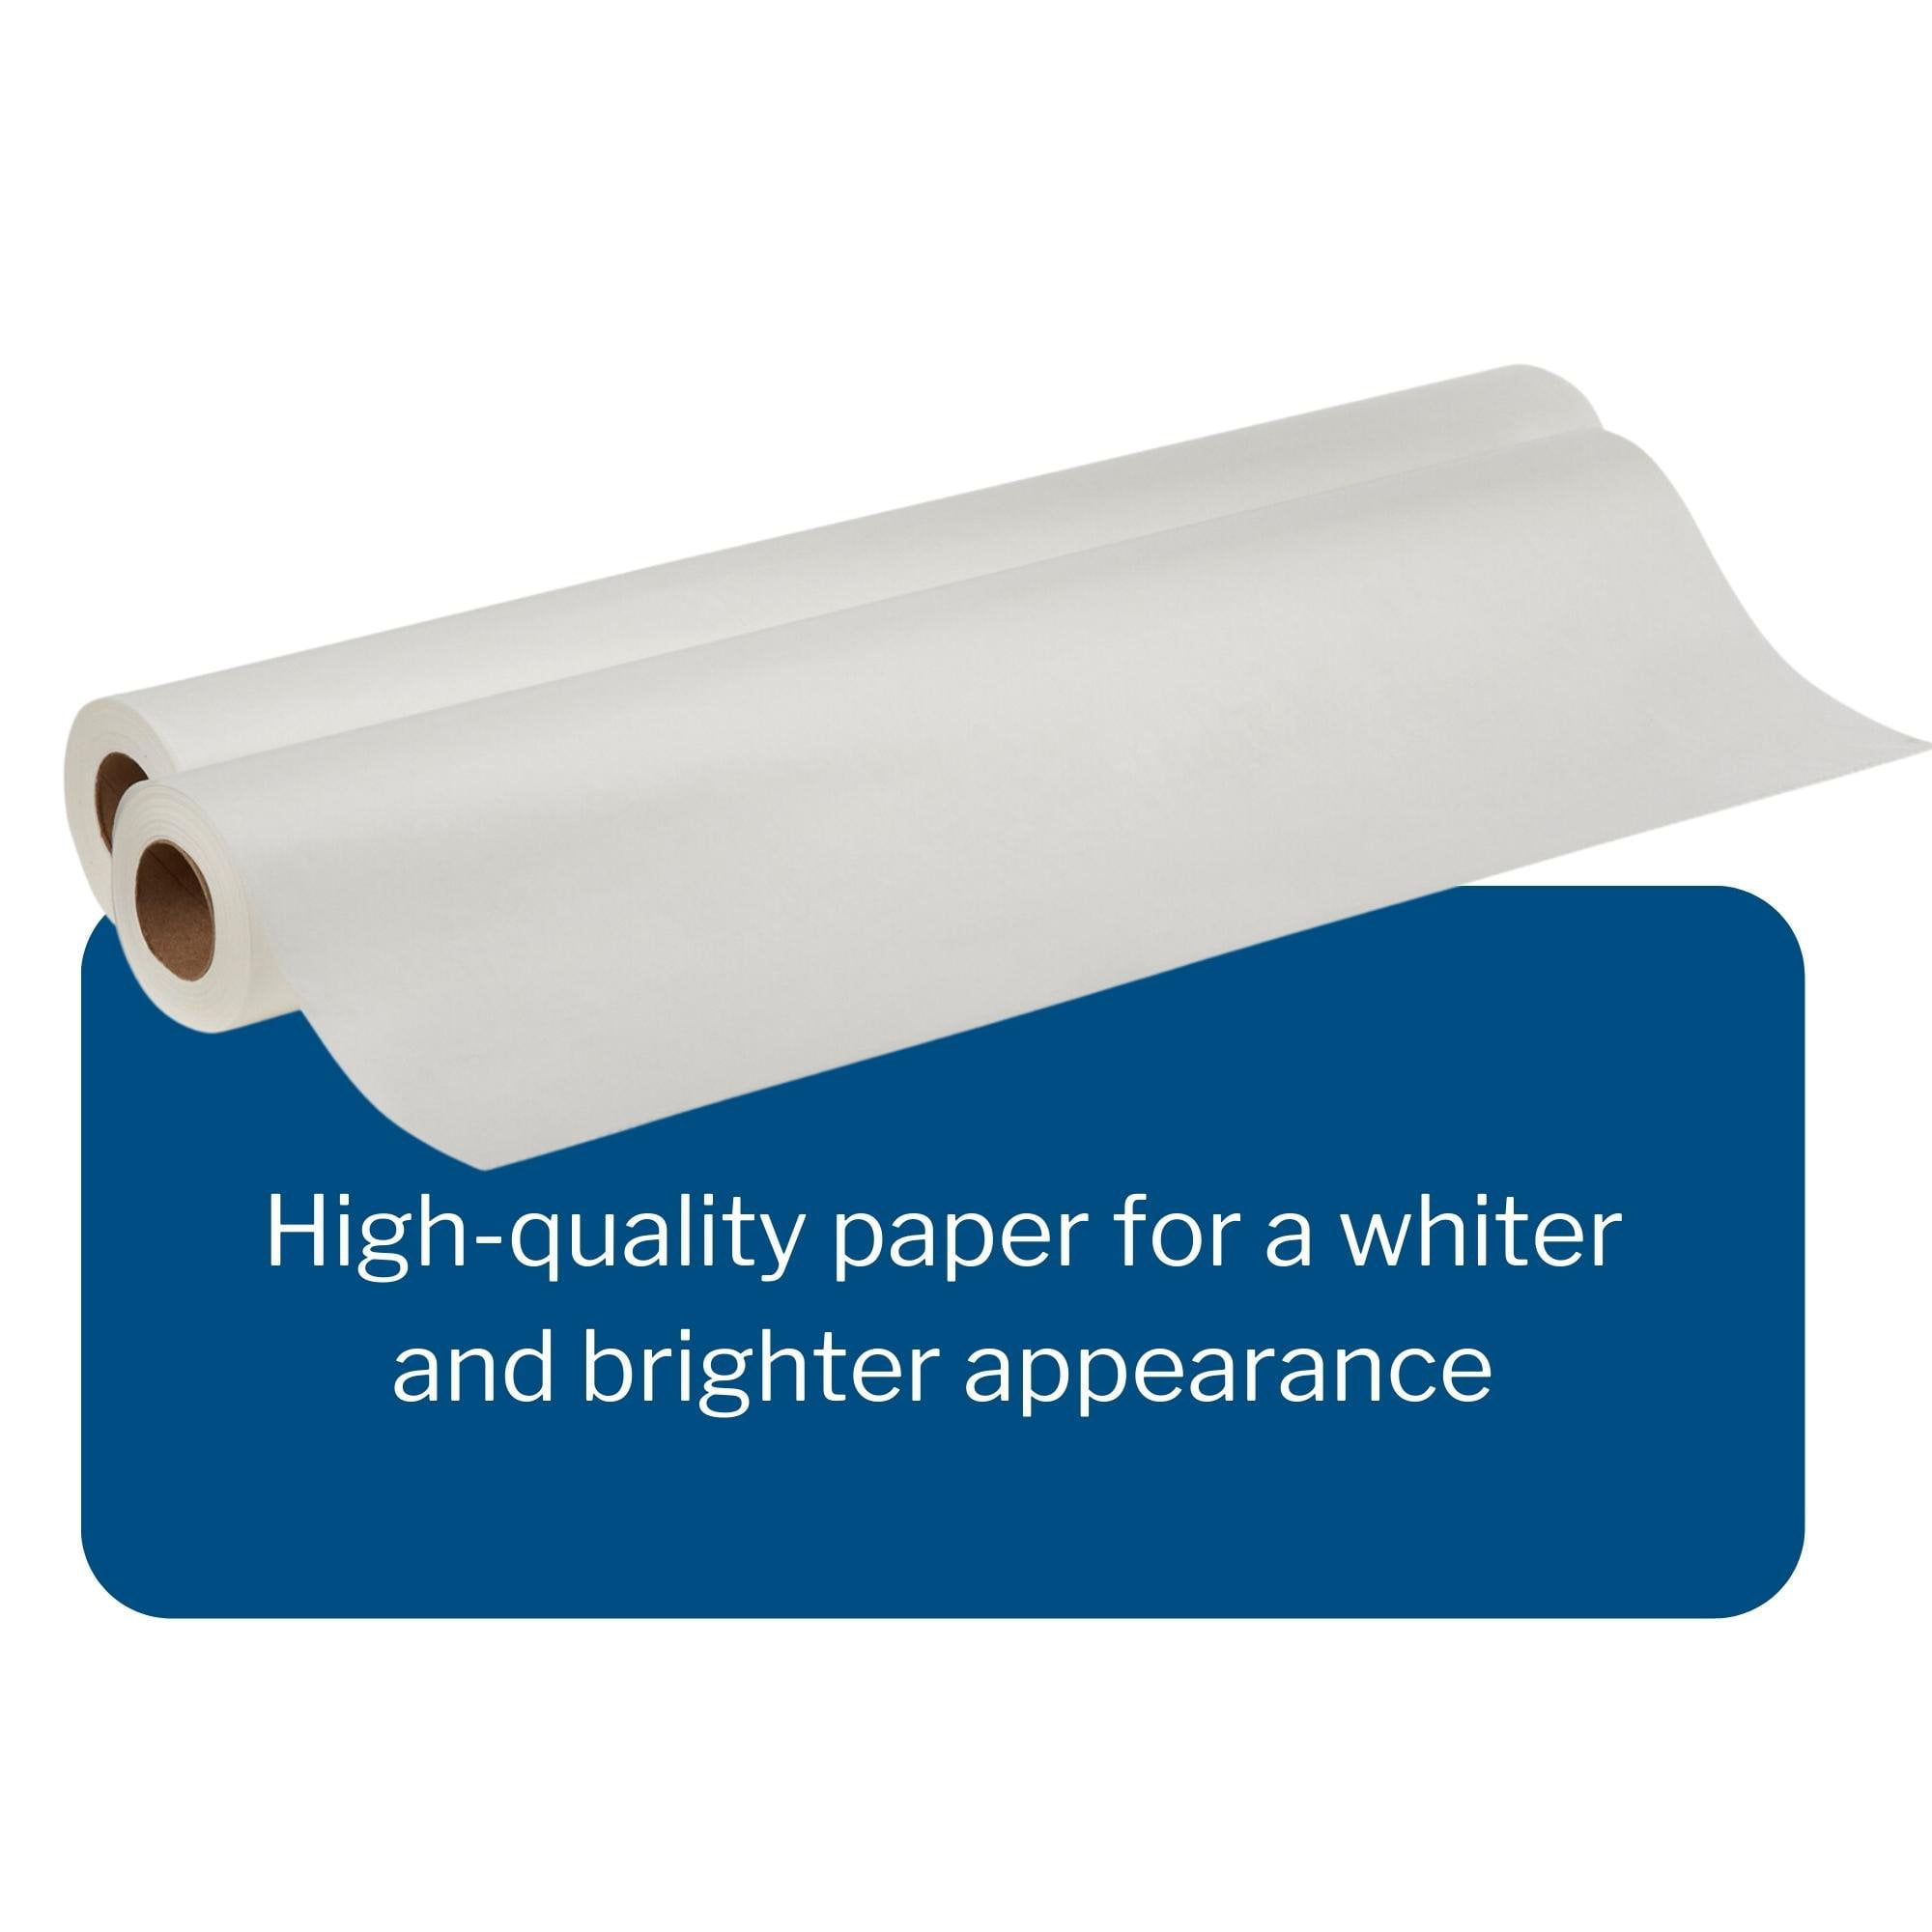 Cardinal Health Examination Table Paper with Smooth Finish: 12 Count,  White, 21 x 225 ft.